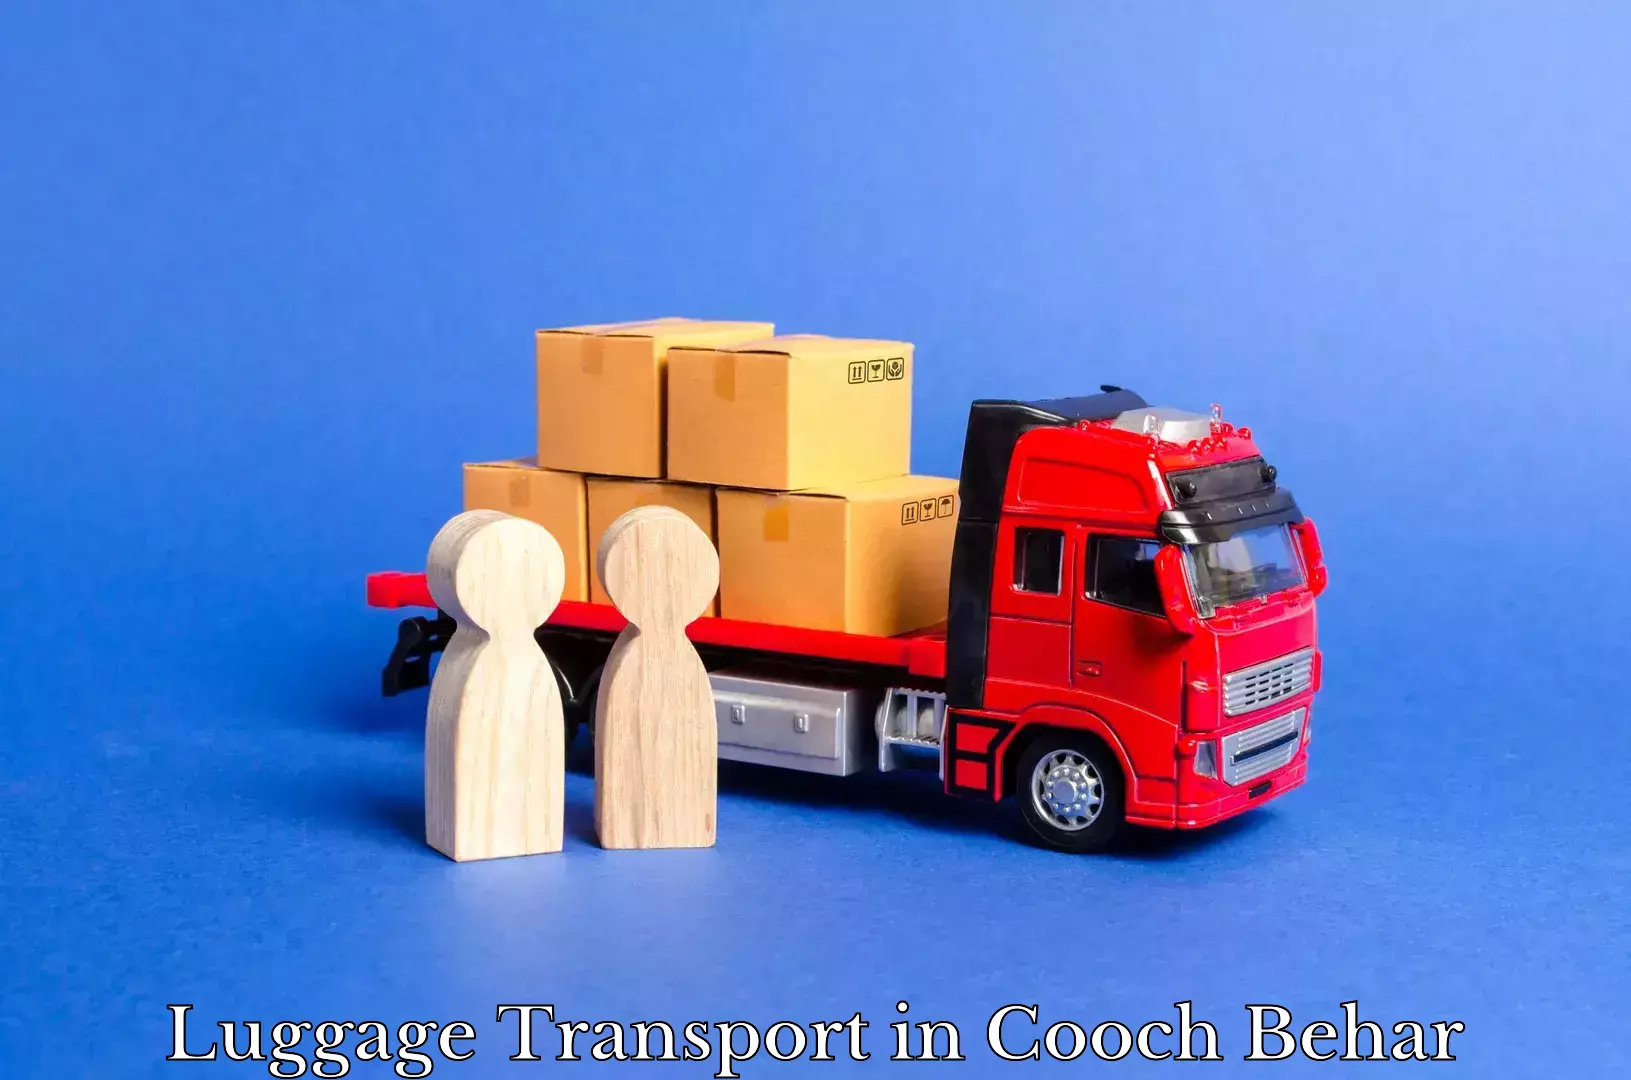 Hassle-free luggage shipping in Cooch Behar